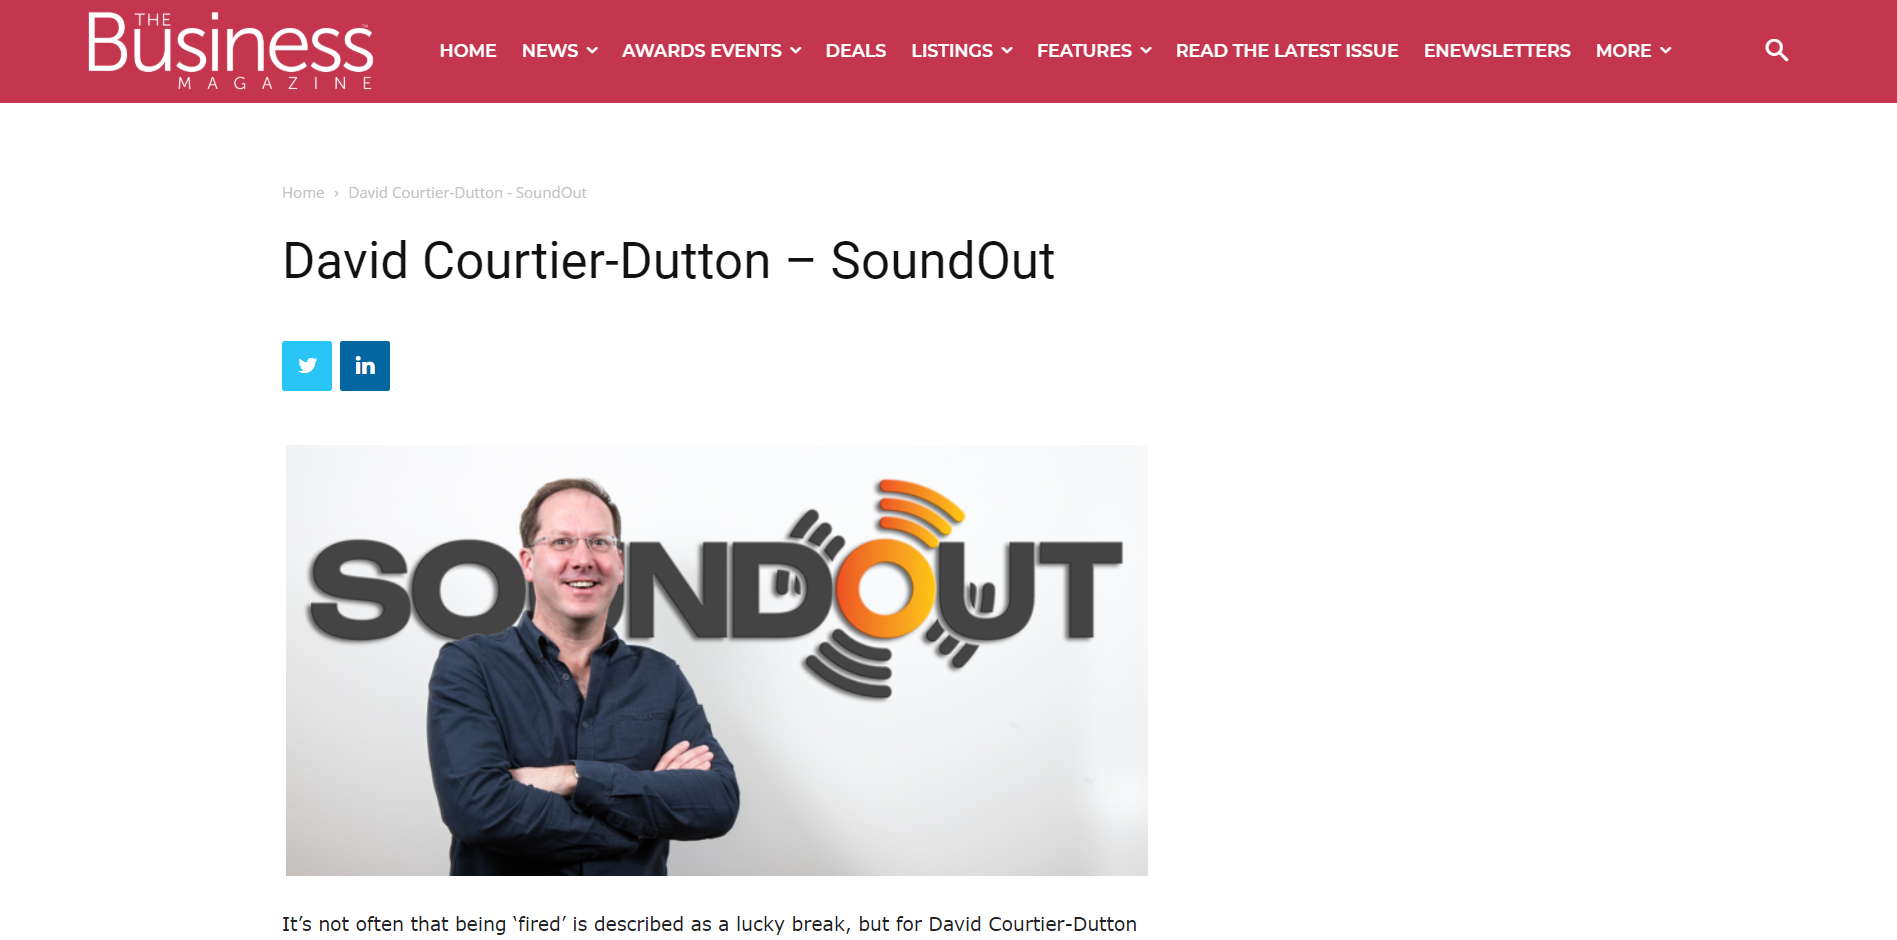 David Coutier-Dutton in the Business magazine